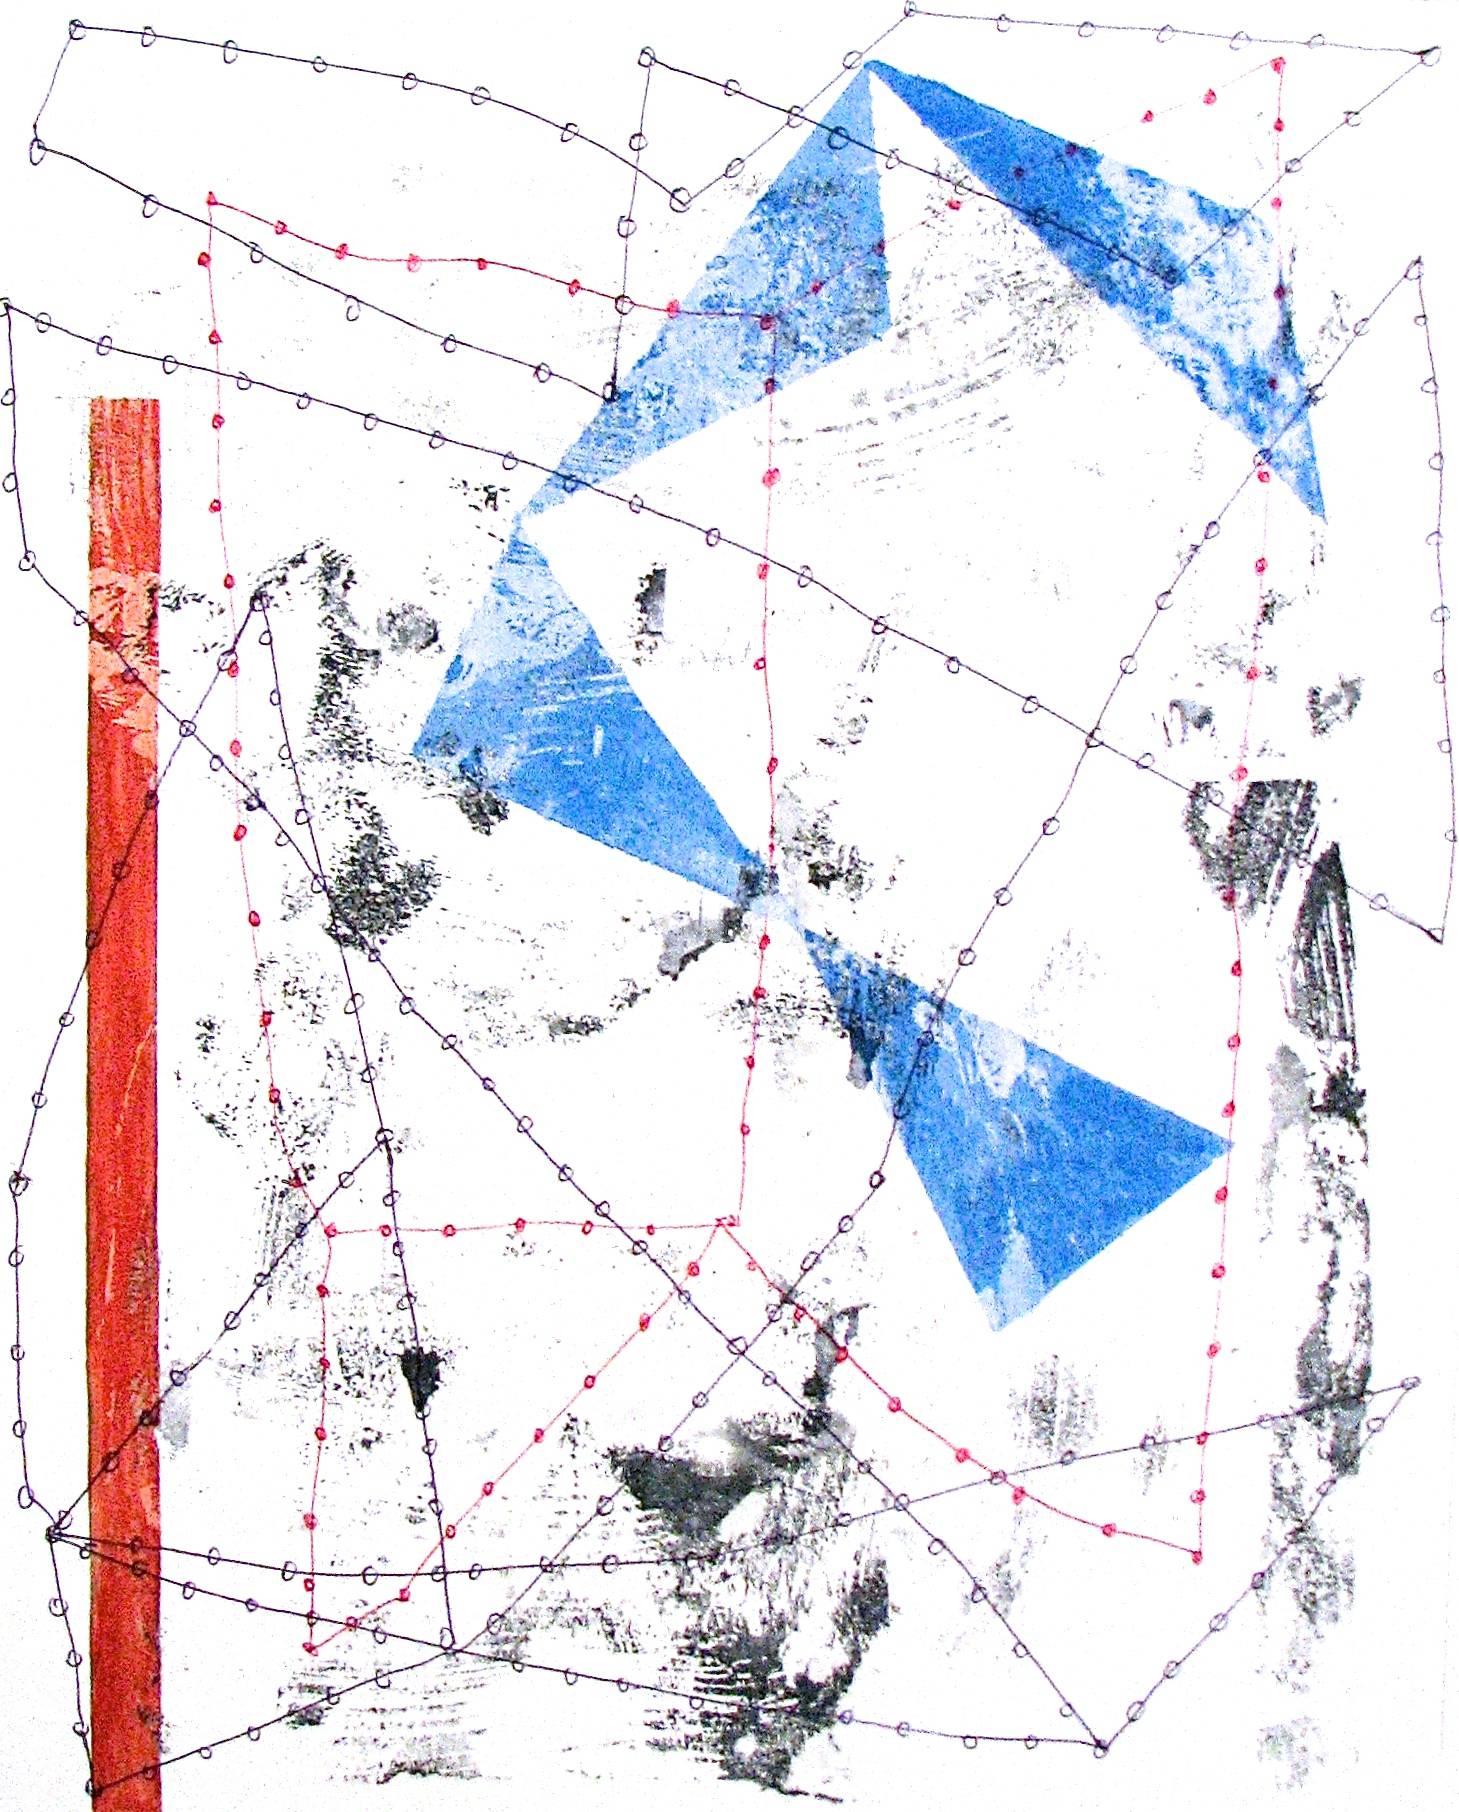 Nancy Berlin Abstract Drawing - "Changing Perceptions 2" Abstract Geometric Red White Blue Playful Mixed Media